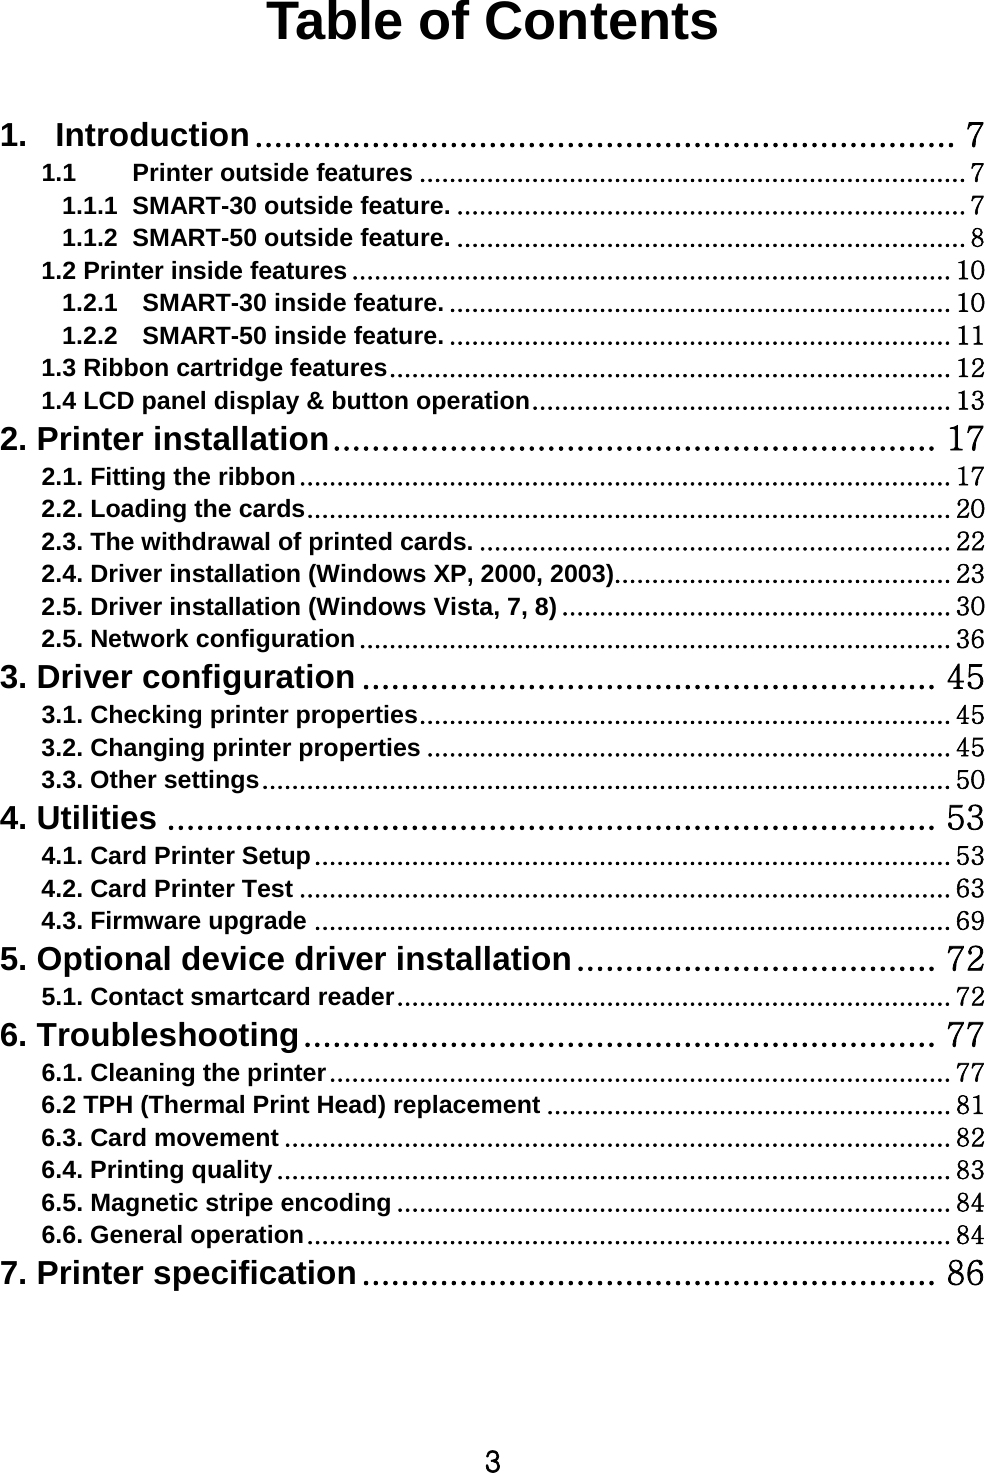 ZTable of Contents1. IntroductionUUUUUUUUUUUUUUUUUUUUUUUUUUUUUUUUUUUUUUUUUUUUUUUUUUUUUUUUUUUUUUUUUUUUUUUU ^1.1 Printer outside features UUUUUUUUUUUUUUUUUUUUUUUUUUUUUUUUUUUUUUUUUUUUUUUUUUUUUUUUUUUUUUUUUUUUUUUUU ^1.1.1 SMART-30 outside feature. UUUUUUUUUUUUUUUUUUUUUUUUUUUUUUUUUUUUUUUUUUUUUUUUUUUUUUUUUUUUUUUUUUUU ^1.1.2 SMART-50 outside feature. UUUUUUUUUUUUUUUUUUUUUUUUUUUUUUUUUUUUUUUUUUUUUUUUUUUUUUUUUUUUUUUUUUUU _1.2 Printer inside featuresUUUUUUUUUUUUUUUUUUUUUUUUUUUUUUUUUUUUUUUUUUUUUUUUUUUUUUUUUUUUUUUUUUUUUUUUUUUUUUUU XW1.2.1 SMART-30 inside feature.UUUUUUUUUUUUUUUUUUUUUUUUUUUUUUUUUUUUUUUUUUUUUUUUUUUUUUUUUUUUUUUUUUU XW1.2.2 SMART-50 inside feature.UUUUUUUUUUUUUUUUUUUUUUUUUUUUUUUUUUUUUUUUUUUUUUUUUUUUUUUUUUUUUUUUUUU XX1.3 Ribbon cartridge featuresUUUUUUUUUUUUUUUUUUUUUUUUUUUUUUUUUUUUUUUUUUUUUUUUUUUUUUUUUUUUUUUUUUUUUUUUUUU XY1.4 LCD panel display &amp; button operationUUUUUUUUUUUUUUUUUUUUUUUUUUUUUUUUUUUUUUUUUUUUUUUUUUUUUUUU XZ2. Printer installationUUUUUUUUUUUUUUUUUUUUUUUUUUUUUUUUUUUUUUUUUUUUUUUUUUUUUUUUUUUUUU X^2.1. Fitting the ribbonUUUUUUUUUUUUUUUUUUUUUUUUUUUUUUUUUUUUUUUUUUUUUUUUUUUUUUUUUUUUUUUUUUUUUUUUUUUUUUUUUUUUUUU X^2.2. Loading the cardsUUUUUUUUUUUUUUUUUUUUUUUUUUUUUUUUUUUUUUUUUUUUUUUUUUUUUUUUUUUUUUUUUUUUUUUUUUUUUUUUUUUUUU YW2.3. The withdrawal of printed cards. UUUUUUUUUUUUUUUUUUUUUUUUUUUUUUUUUUUUUUUUUUUUUUUUUUUUUUUUUUUUUUU YY2.4. Driver installation (Windows XP, 2000, 2003)UUUUUUUUUUUUUUUUUUUUUUUUUUUUUUUUUUUUUUUUUUUUU YZ2.5. Driver installation (Windows Vista, 7, 8)UUUUUUUUUUUUUUUUUUUUUUUUUUUUUUUUUUUUUUUUUUUUUUUUUUUU ZW2.5. Network configurationUUUUUUUUUUUUUUUUUUUUUUUUUUUUUUUUUUUUUUUUUUUUUUUUUUUUUUUUUUUUUUUUUUUUUUUUUUUUUUU Z]3. Driver configuration UUUUUUUUUUUUUUUUUUUUUUUUUUUUUUUUUUUUUUUUUUUUUUUUUUUUUUUUUUU [\3.1. Checking printer propertiesUUUUUUUUUUUUUUUUUUUUUUUUUUUUUUUUUUUUUUUUUUUUUUUUUUUUUUUUUUUUUUUUUUUUUUU [\3.2. Changing printer properties UUUUUUUUUUUUUUUUUUUUUUUUUUUUUUUUUUUUUUUUUUUUUUUUUUUUUUUUUUUUUUUUUUUUUU [\3.3. Other settingsUUUUUUUUUUUUUUUUUUUUUUUUUUUUUUUUUUUUUUUUUUUUUUUUUUUUUUUUUUUUUUUUUUUUUUUUUUUUUUUUUUUUUUUUUUUU \W4. Utilities UUUUUUUUUUUUUUUUUUUUUUUUUUUUUUUUUUUUUUUUUUUUUUUUUUUUUUUUUUUUUUUUUUUUUUUUUUUUUUU \Z4.1. Card Printer SetupUUUUUUUUUUUUUUUUUUUUUUUUUUUUUUUUUUUUUUUUUUUUUUUUUUUUUUUUUUUUUUUUUUUUUUUUUUUUUUUUUUUUU \Z4.2. Card Printer Test UUUUUUUUUUUUUUUUUUUUUUUUUUUUUUUUUUUUUUUUUUUUUUUUUUUUUUUUUUUUUUUUUUUUUUUUUUUUUUUUUUUUUUU ]Z4.3. Firmware upgrade UUUUUUUUUUUUUUUUUUUUUUUUUUUUUUUUUUUUUUUUUUUUUUUUUUUUUUUUUUUUUUUUUUUUUUUUUUUUUUUUUUUUU ]`5. Optional device driver installationUUUUUUUUUUUUUUUUUUUUUUUUUUUUUUUUUUUUU ^Y5.1. Contact smartcard readerUUUUUUUUUUUUUUUUUUUUUUUUUUUUUUUUUUUUUUUUUUUUUUUUUUUUUUUUUUUUUUUUUUUUUUUUUU ^Y6. TroubleshootingUUUUUUUUUUUUUUUUUUUUUUUUUUUUUUUUUUUUUUUUUUUUUUUUUUUUUUUUUUUUUUUUU ^^6.1. Cleaning the printerUUUUUUUUUUUUUUUUUUUUUUUUUUUUUUUUUUUUUUUUUUUUUUUUUUUUUUUUUUUUUUUUUUUUUUUUUUUUUUUUUUU ^^6.2 TPH (Thermal Print Head) replacement UUUUUUUUUUUUUUUUUUUUUUUUUUUUUUUUUUUUUUUUUUUUUUUUUUUUUU _X6.3. Card movement UUUUUUUUUUUUUUUUUUUUUUUUUUUUUUUUUUUUUUUUUUUUUUUUUUUUUUUUUUUUUUUUUUUUUUUUUUUUUUUUUUUUUUUUU _Y6.4. Printing quality UUUUUUUUUUUUUUUUUUUUUUUUUUUUUUUUUUUUUUUUUUUUUUUUUUUUUUUUUUUUUUUUUUUUUUUUUUUUUUUUUUUUUUUUUU _Z6.5. Magnetic stripe encoding UUUUUUUUUUUUUUUUUUUUUUUUUUUUUUUUUUUUUUUUUUUUUUUUUUUUUUUUUUUUUUUUUUUUUUUUUU _[6.6. General operationUUUUUUUUUUUUUUUUUUUUUUUUUUUUUUUUUUUUUUUUUUUUUUUUUUUUUUUUUUUUUUUUUUUUUUUUUUUUUUUUUUUUUU _[7. Printer specificationUUUUUUUUUUUUUUUUUUUUUUUUUUUUUUUUUUUUUUUUUUUUUUUUUUUUUUUUUUU _]